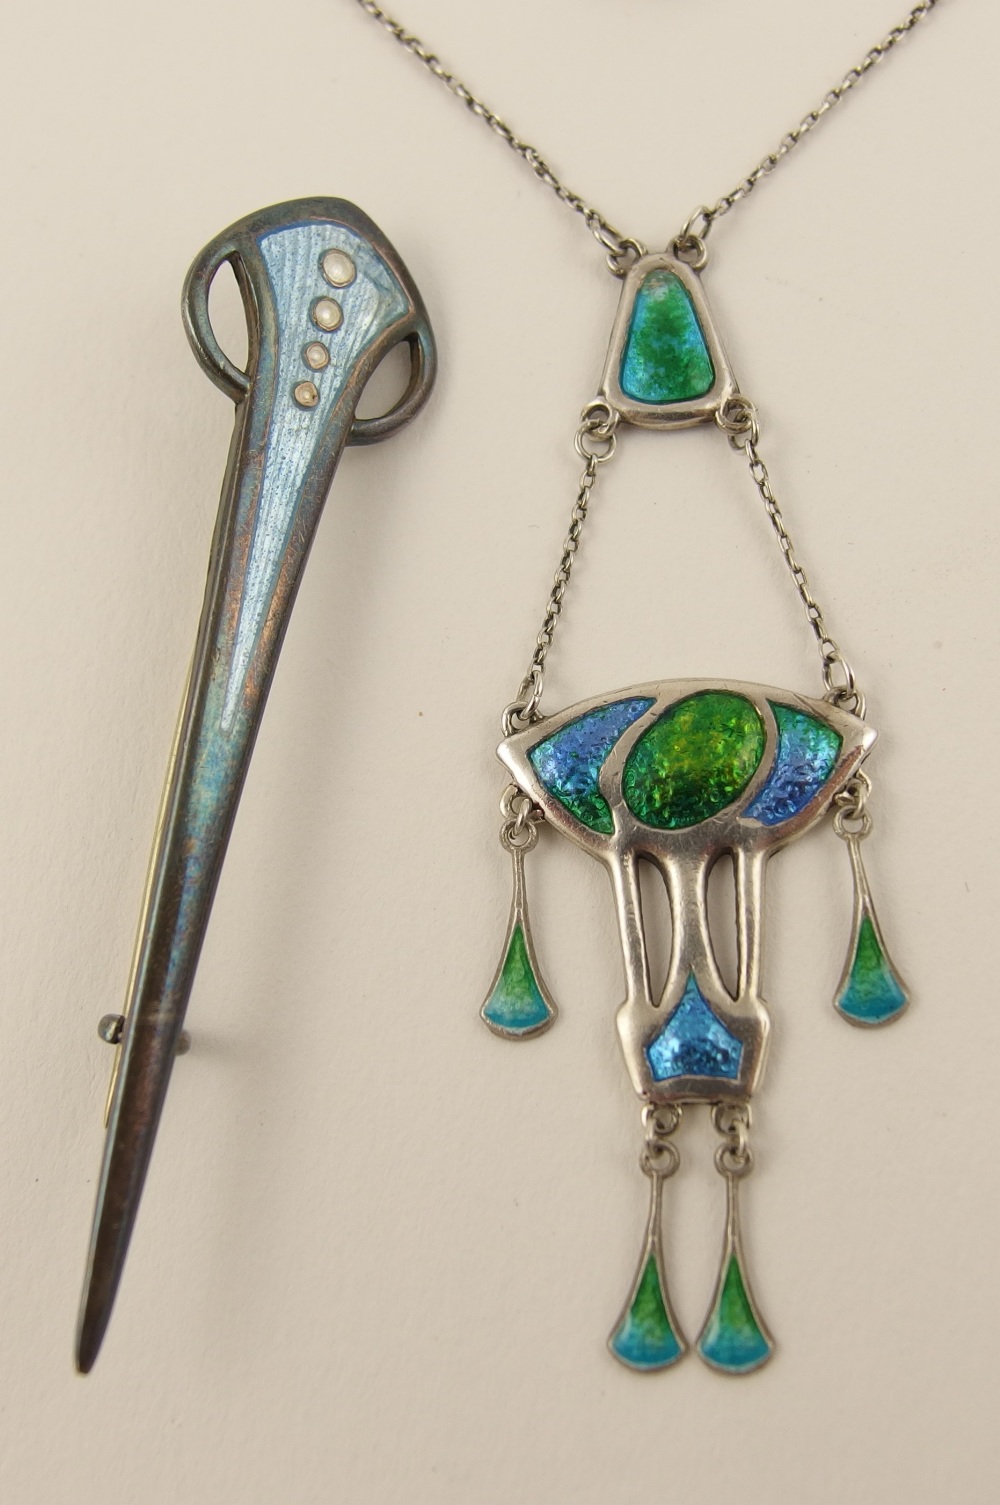 A Charles Horner pendant enamelled in blues and greens the pendant suspended from a central